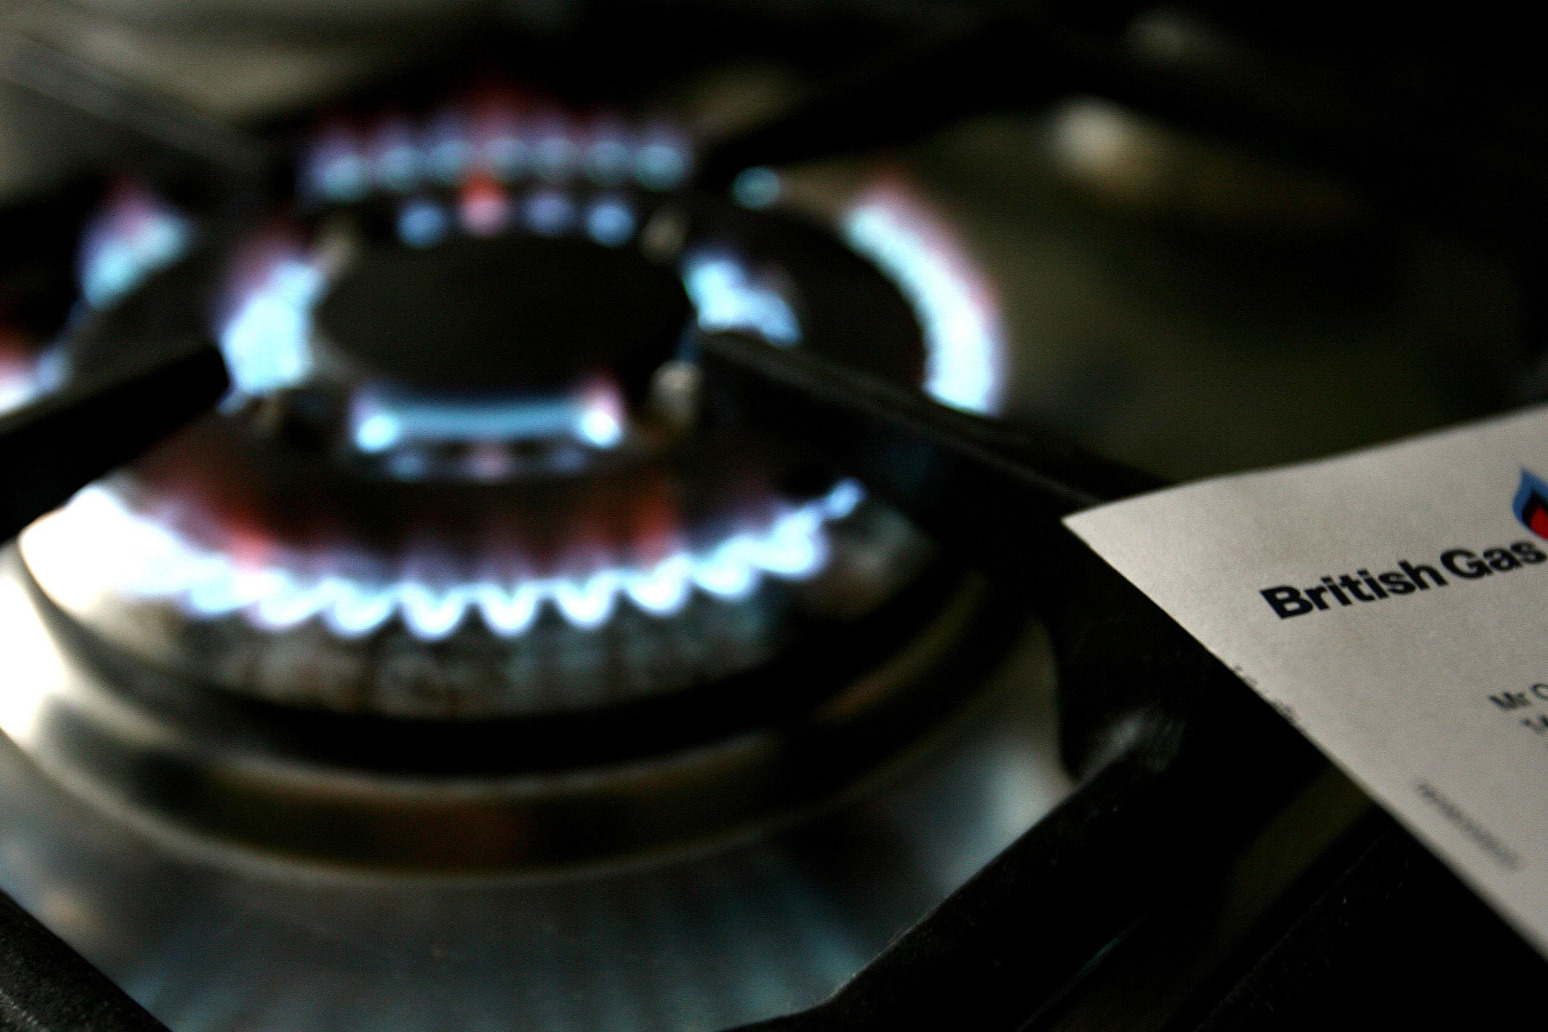 Regulator OFGEM have announced an investigation into British Gas following reports of force-fitting pre-payment meters 